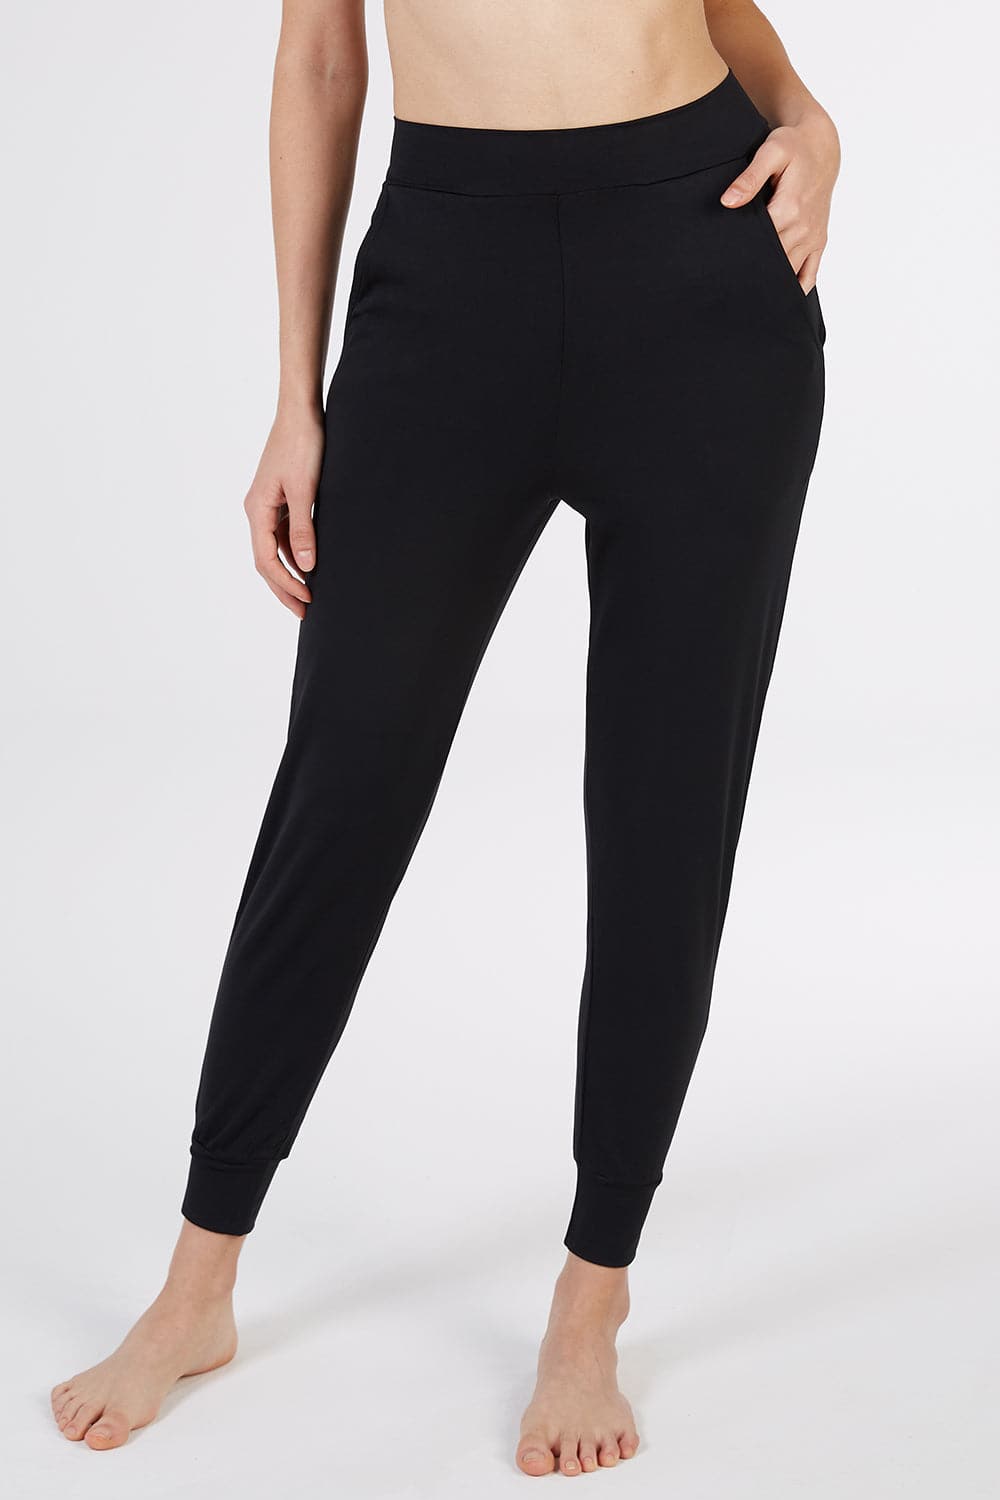 NWT All In Motion Women's Black Mid Rise Jogger Size Small